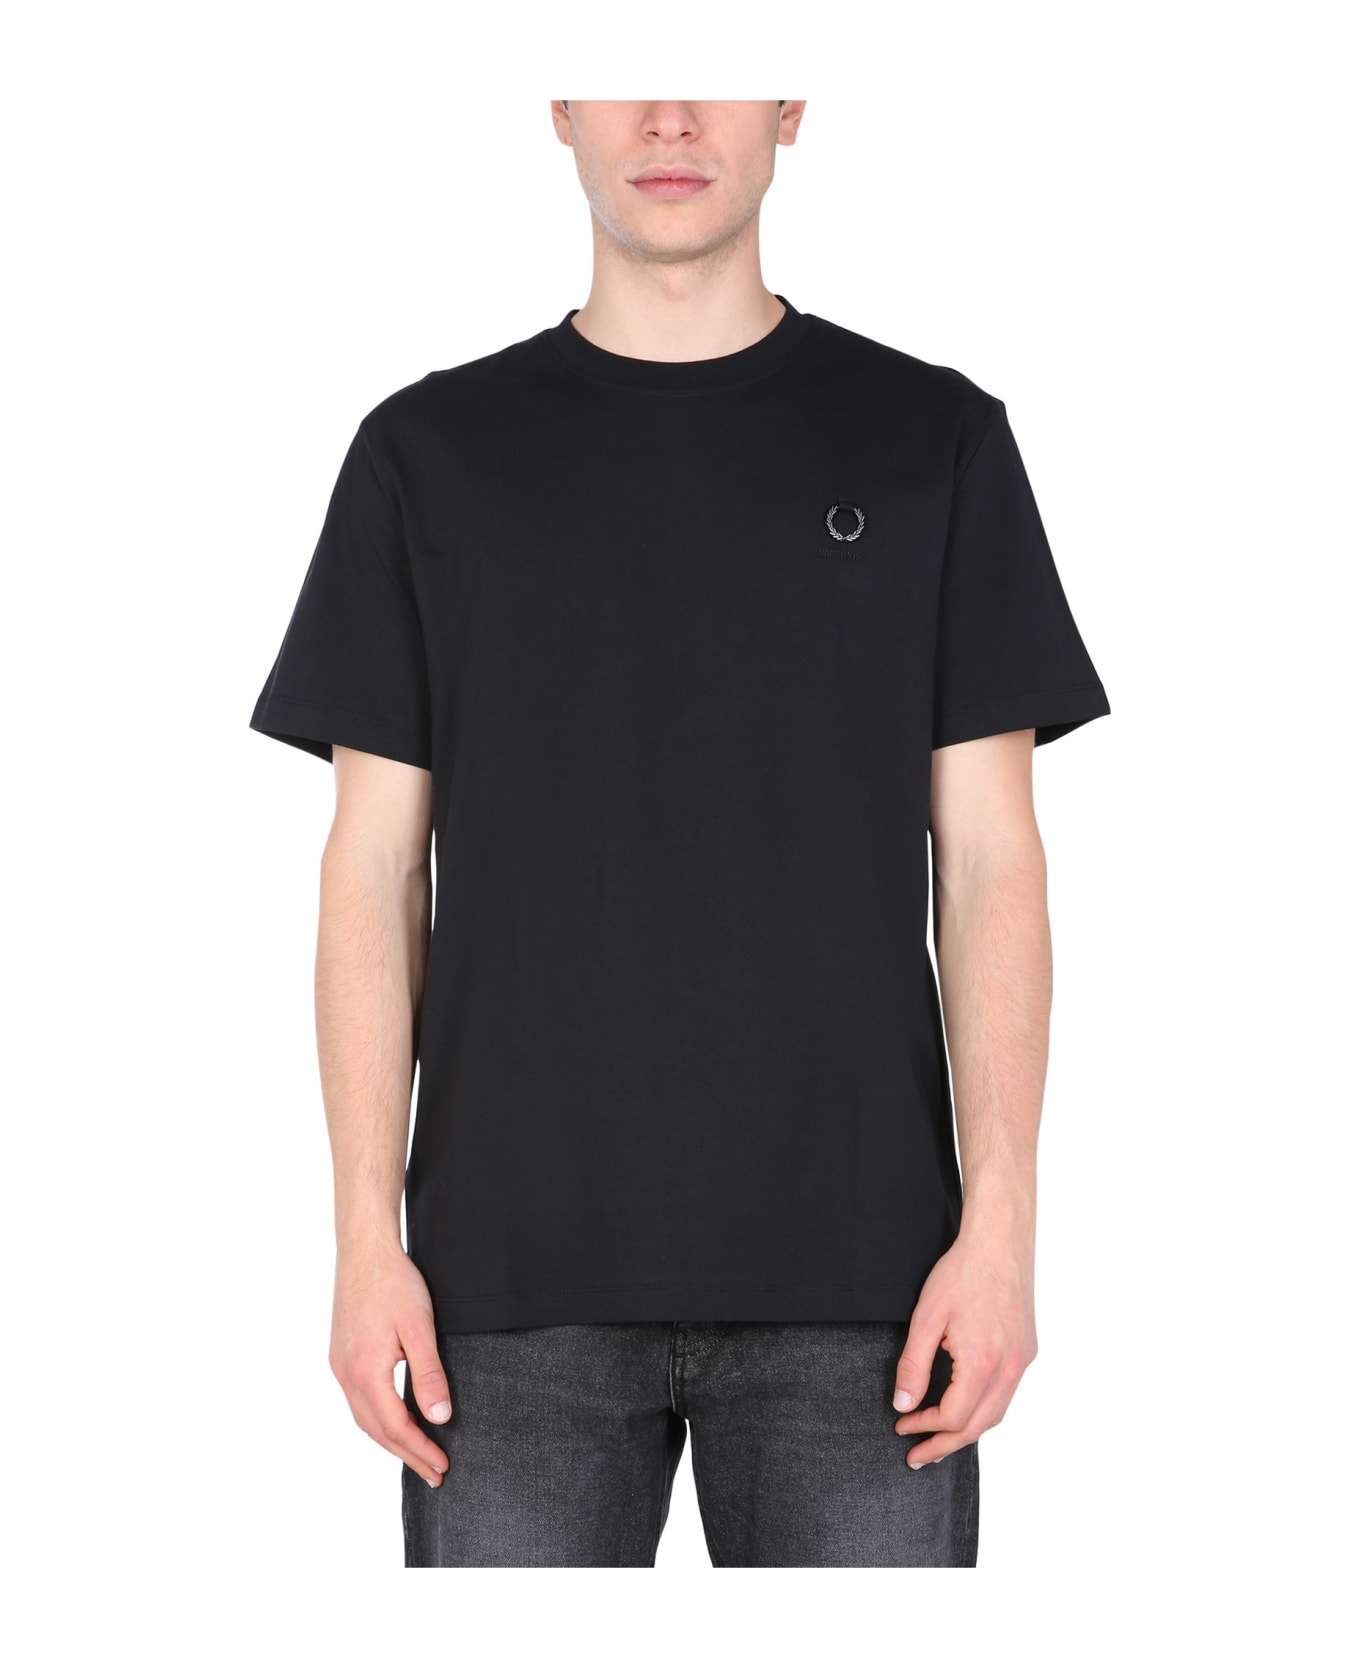 Fred Perry by Raf Simons Crew Neck T-shirt - NERO